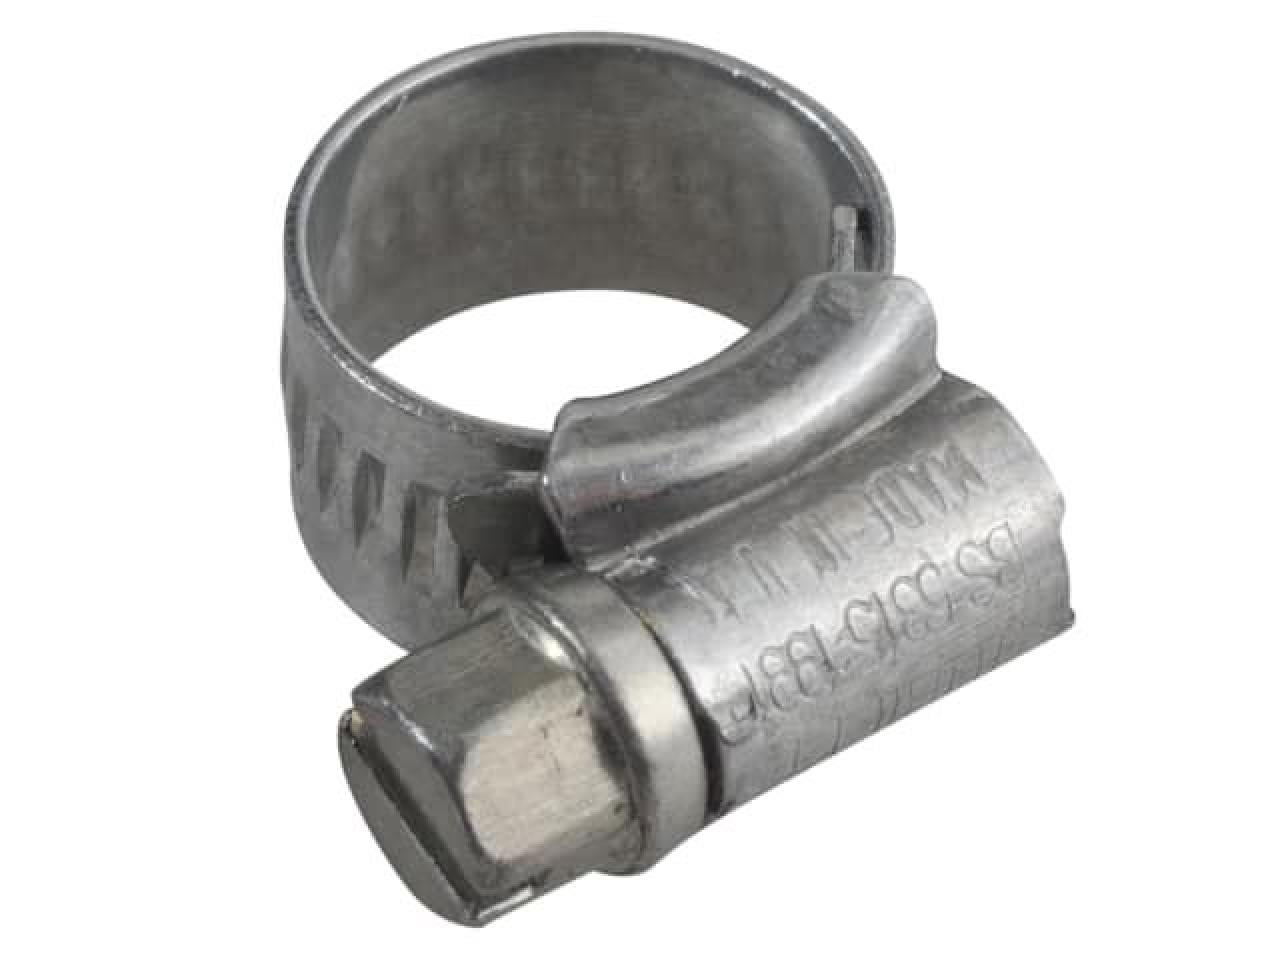 Jubilee Hose Clips Zinc Protected 40-55mm x 10 2 